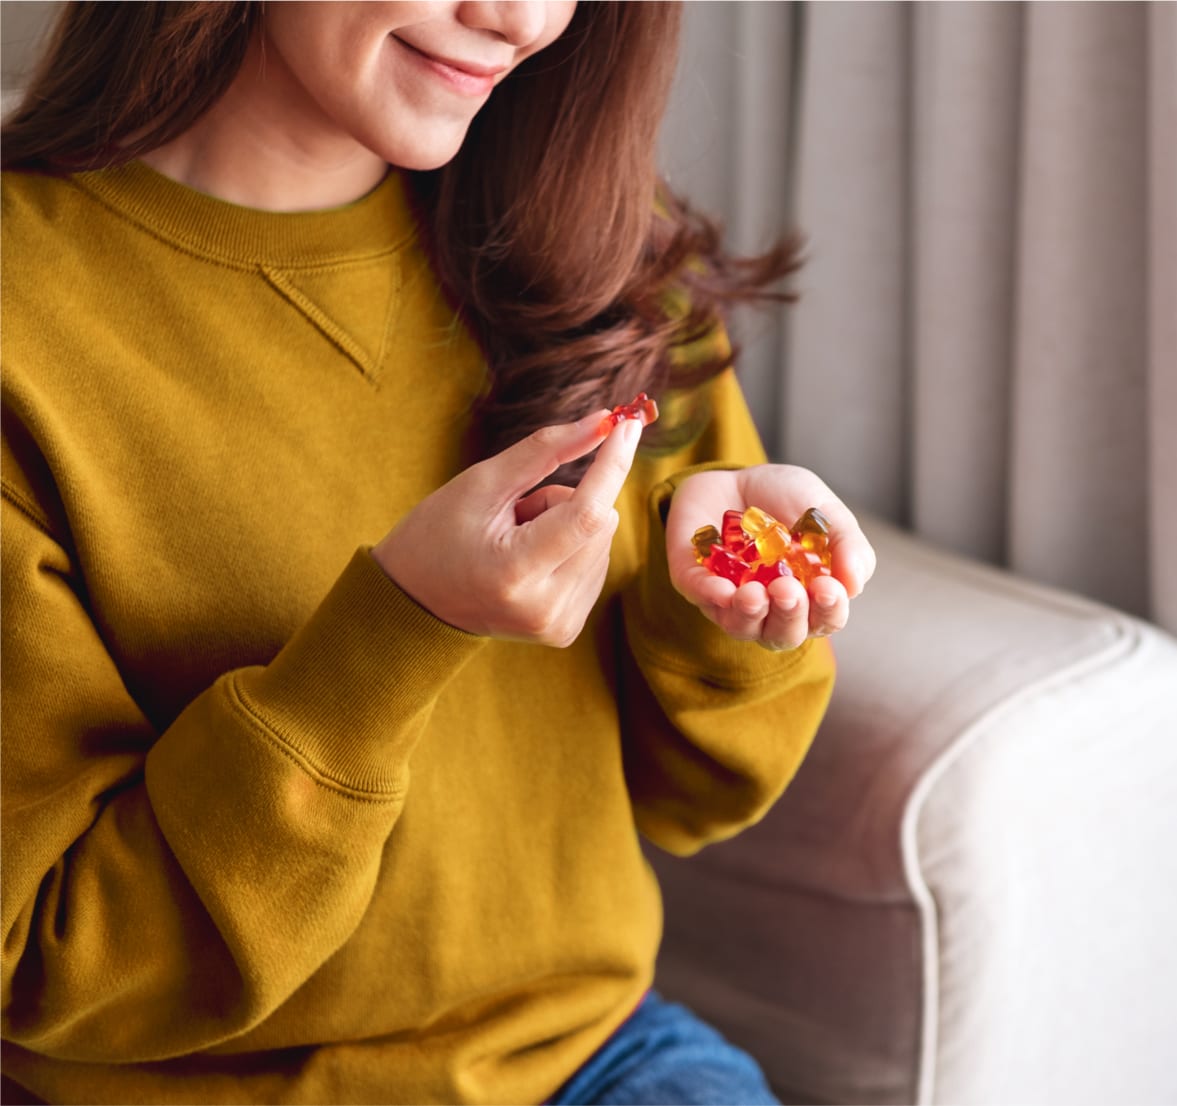 Closeup image of a young woman holding and eating vitamin gummies.